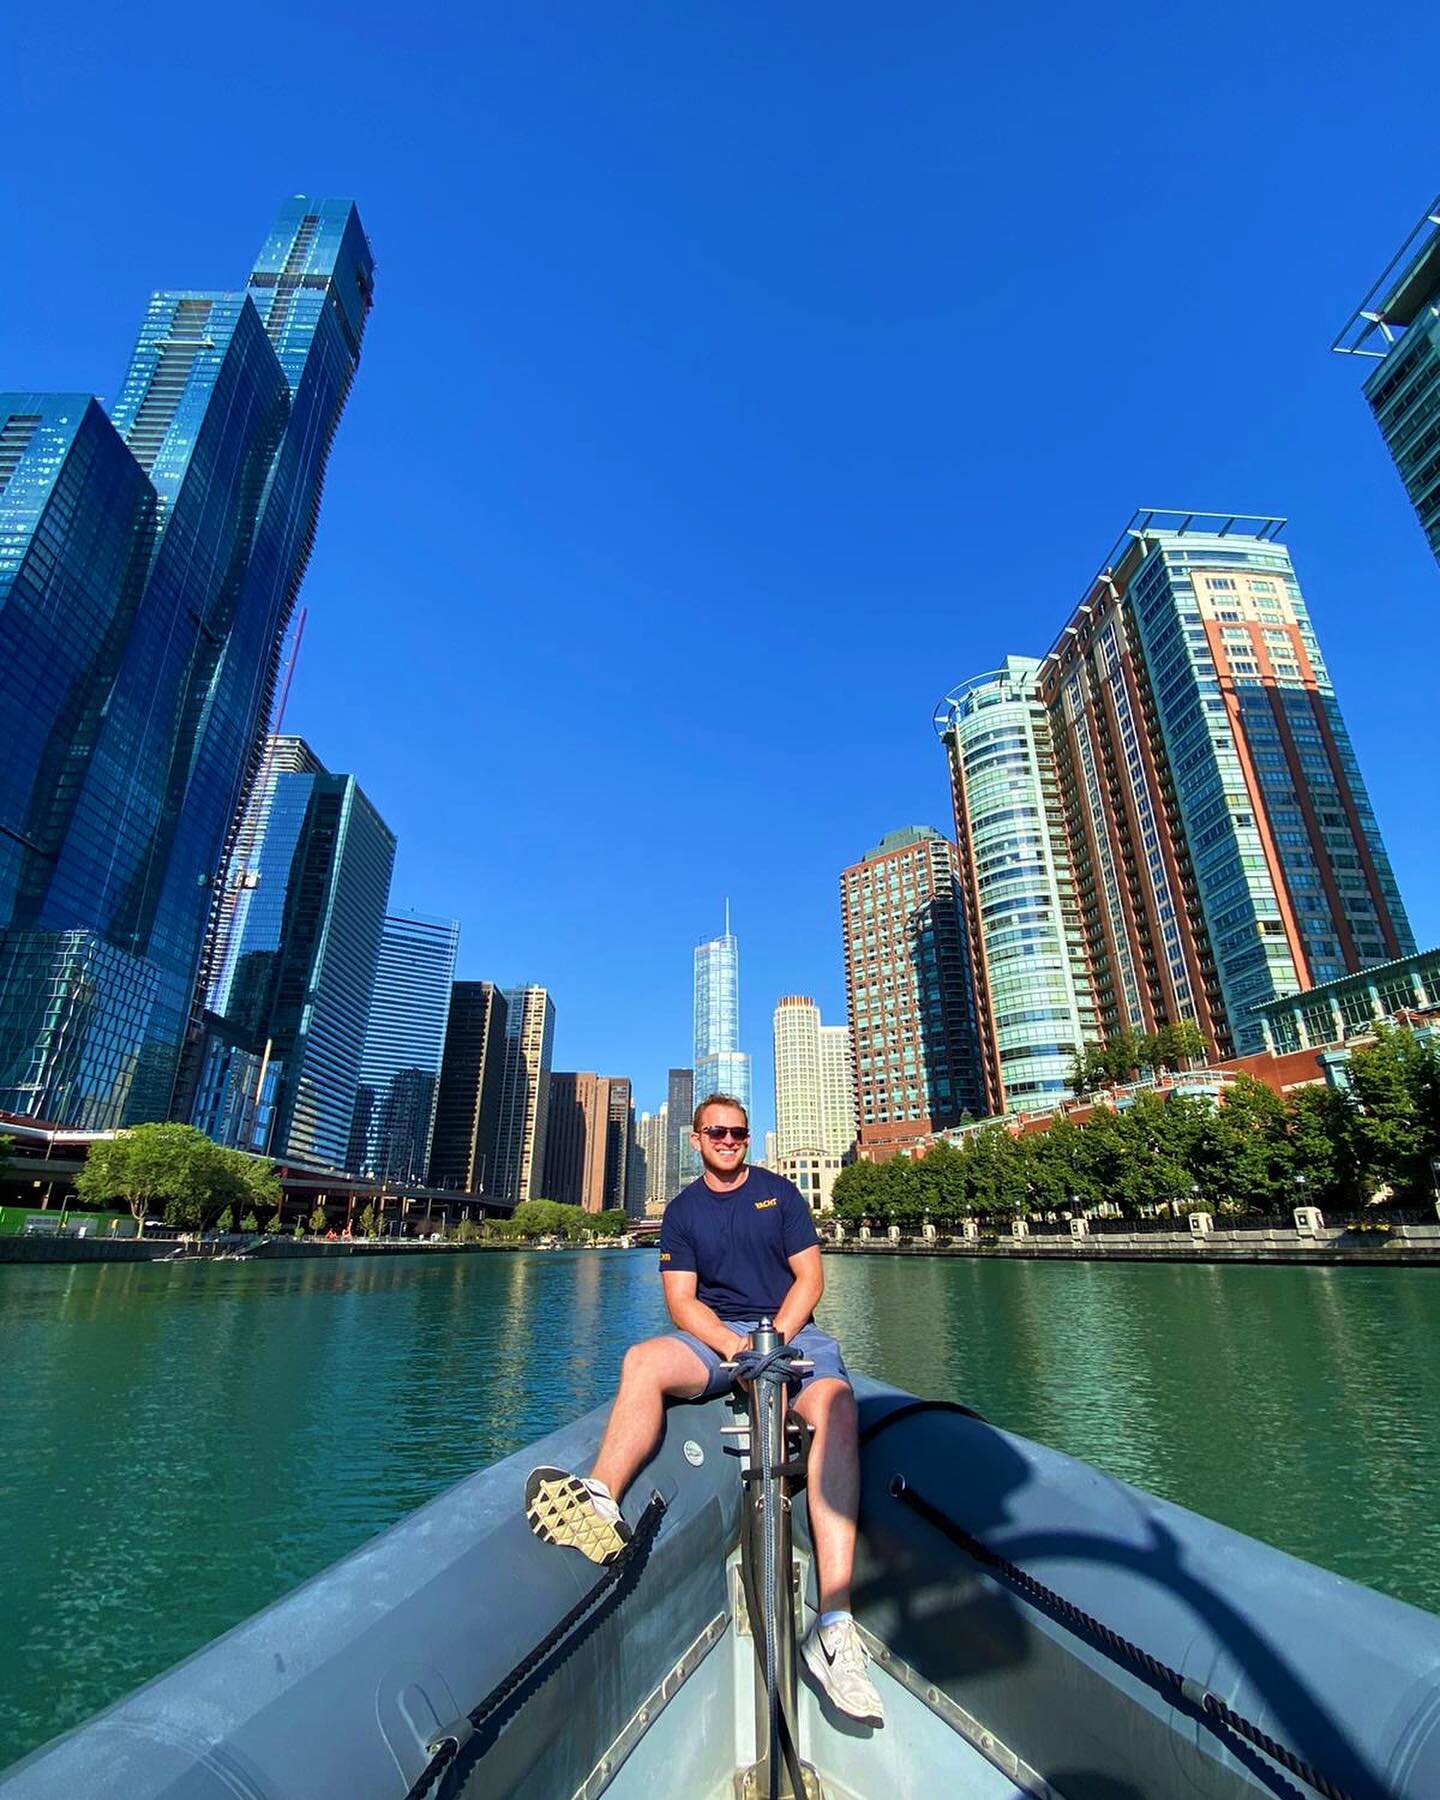 Have you entered our raffle yet? Go to our last post to see how!

Introducing: Yachti! Our 24&rsquo; ex-military Willard Marine is the vessel you&rsquo;ll enjoy if you win our raffle for a 4 hour private charter for up to 6 people 🚤 See the Chicago 